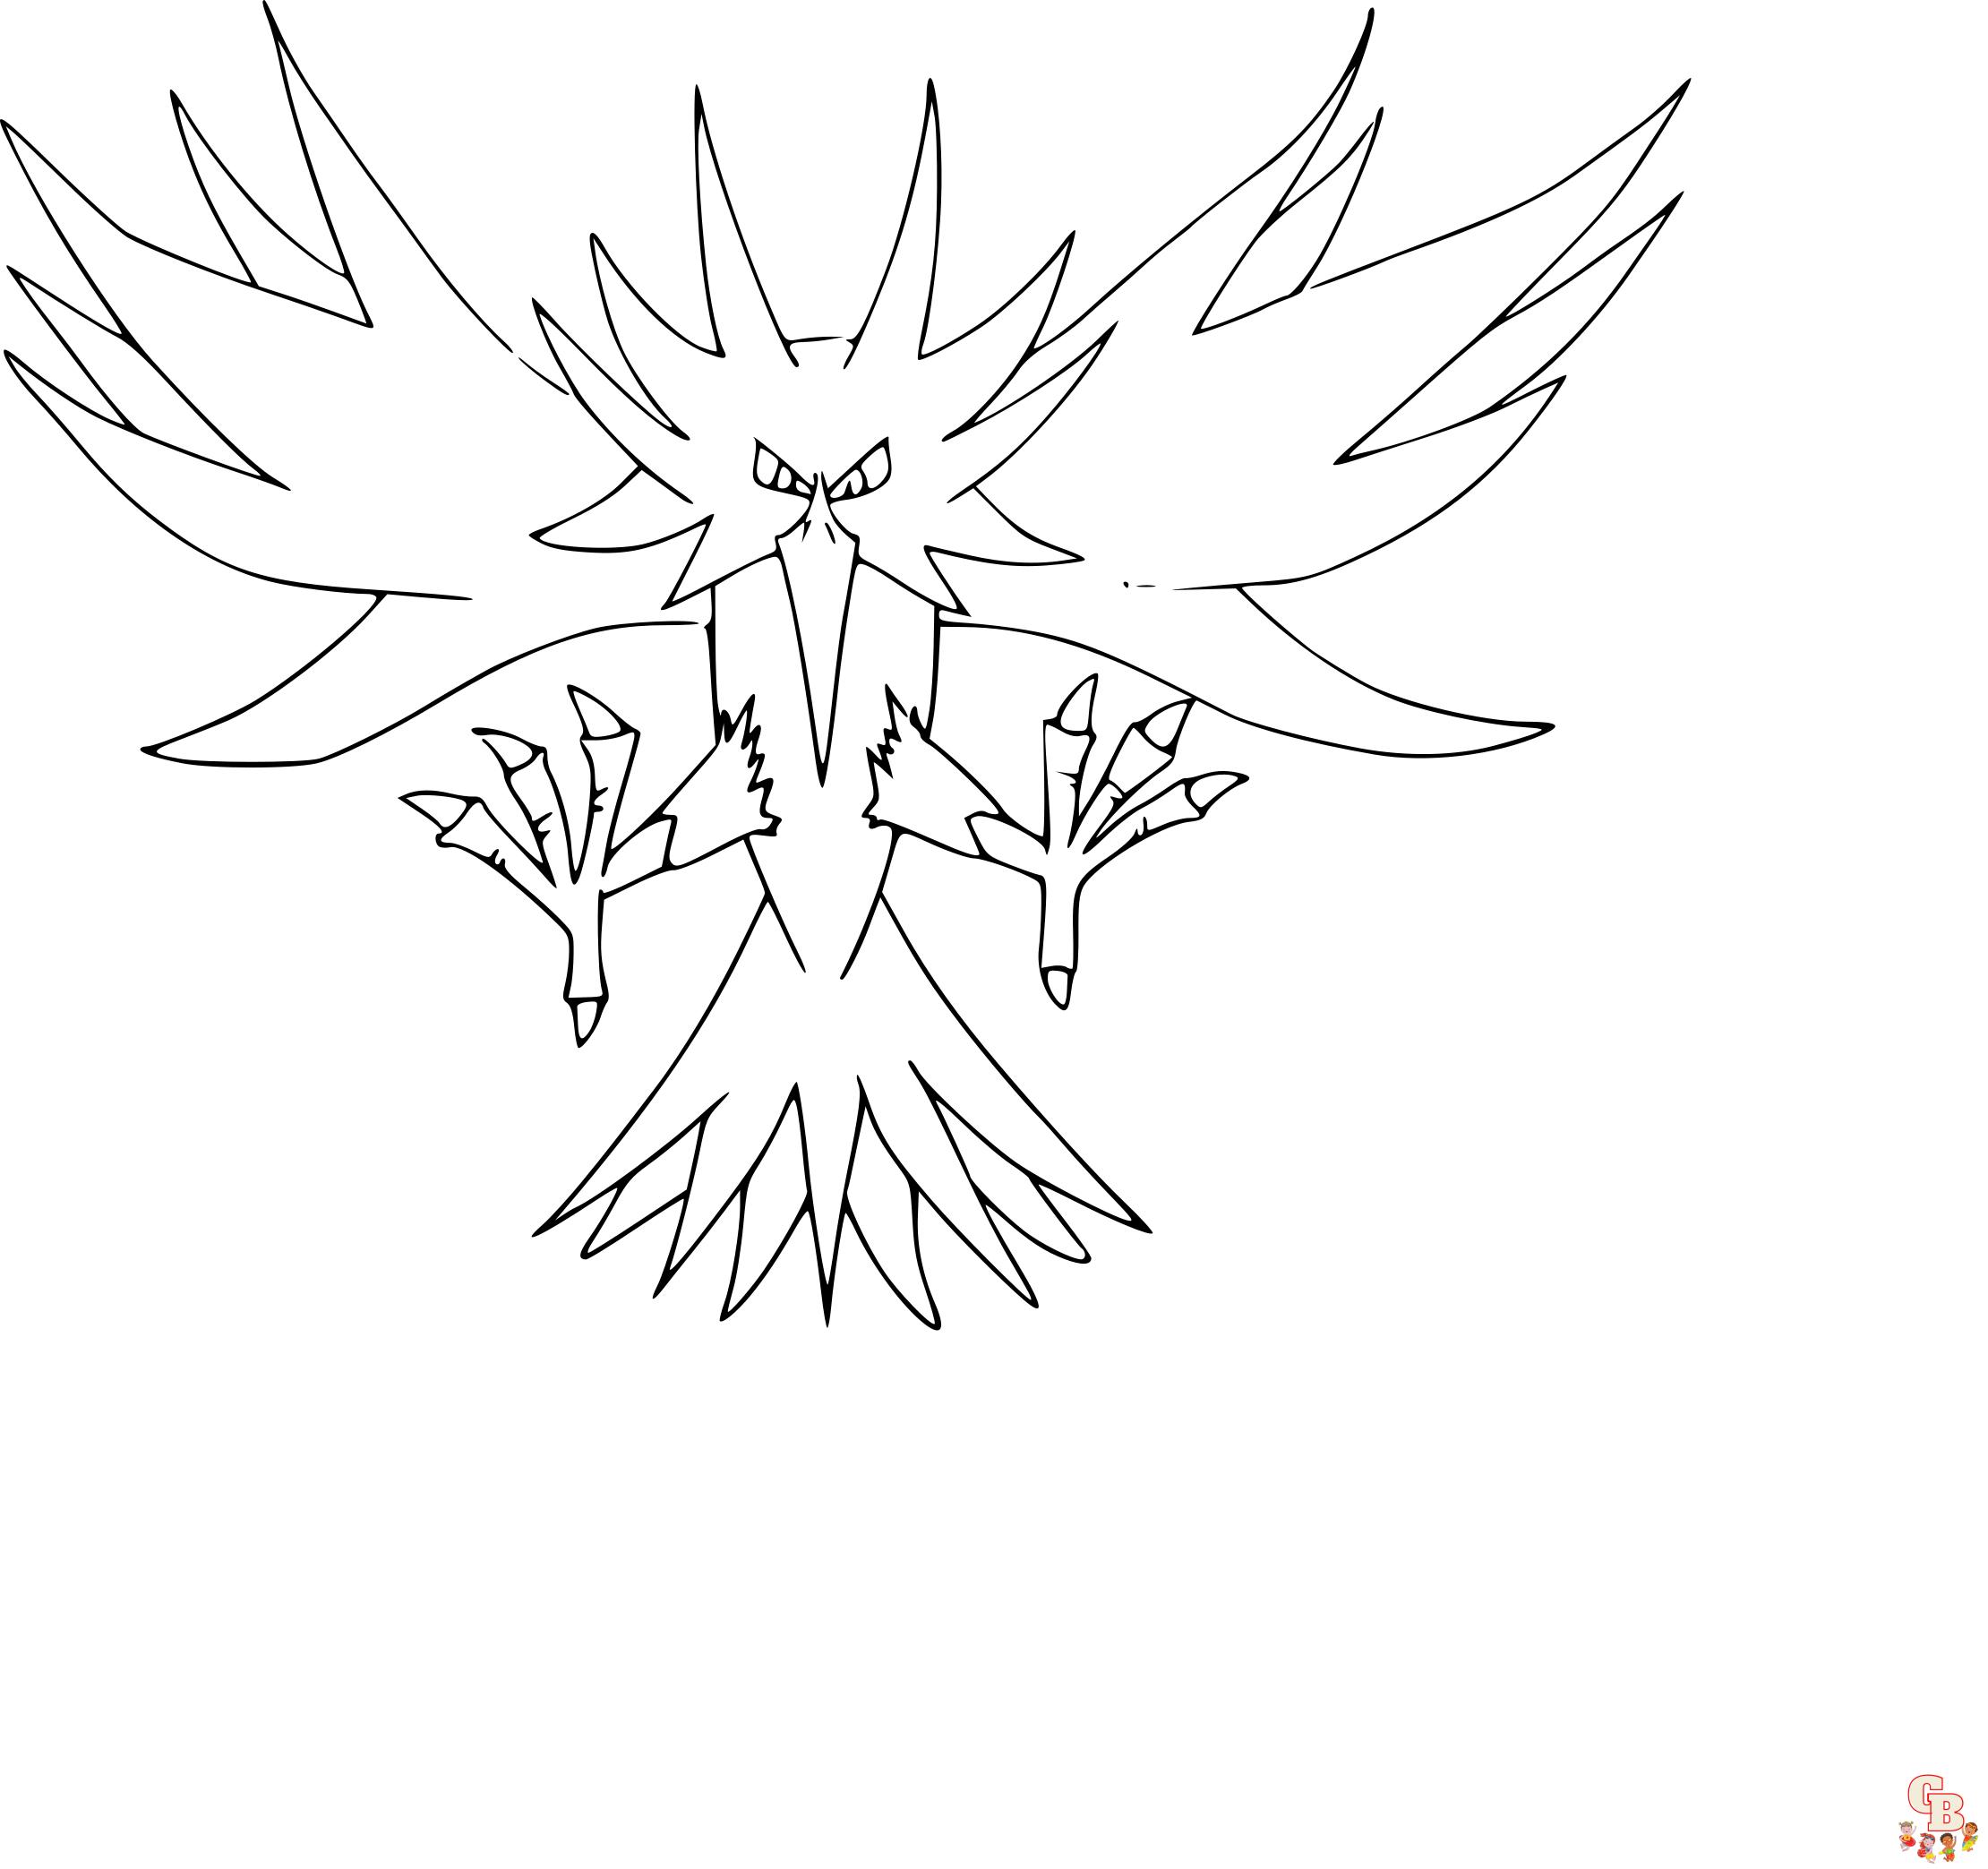 Zapdos Coloring Pages: Electric Excitement for Kids